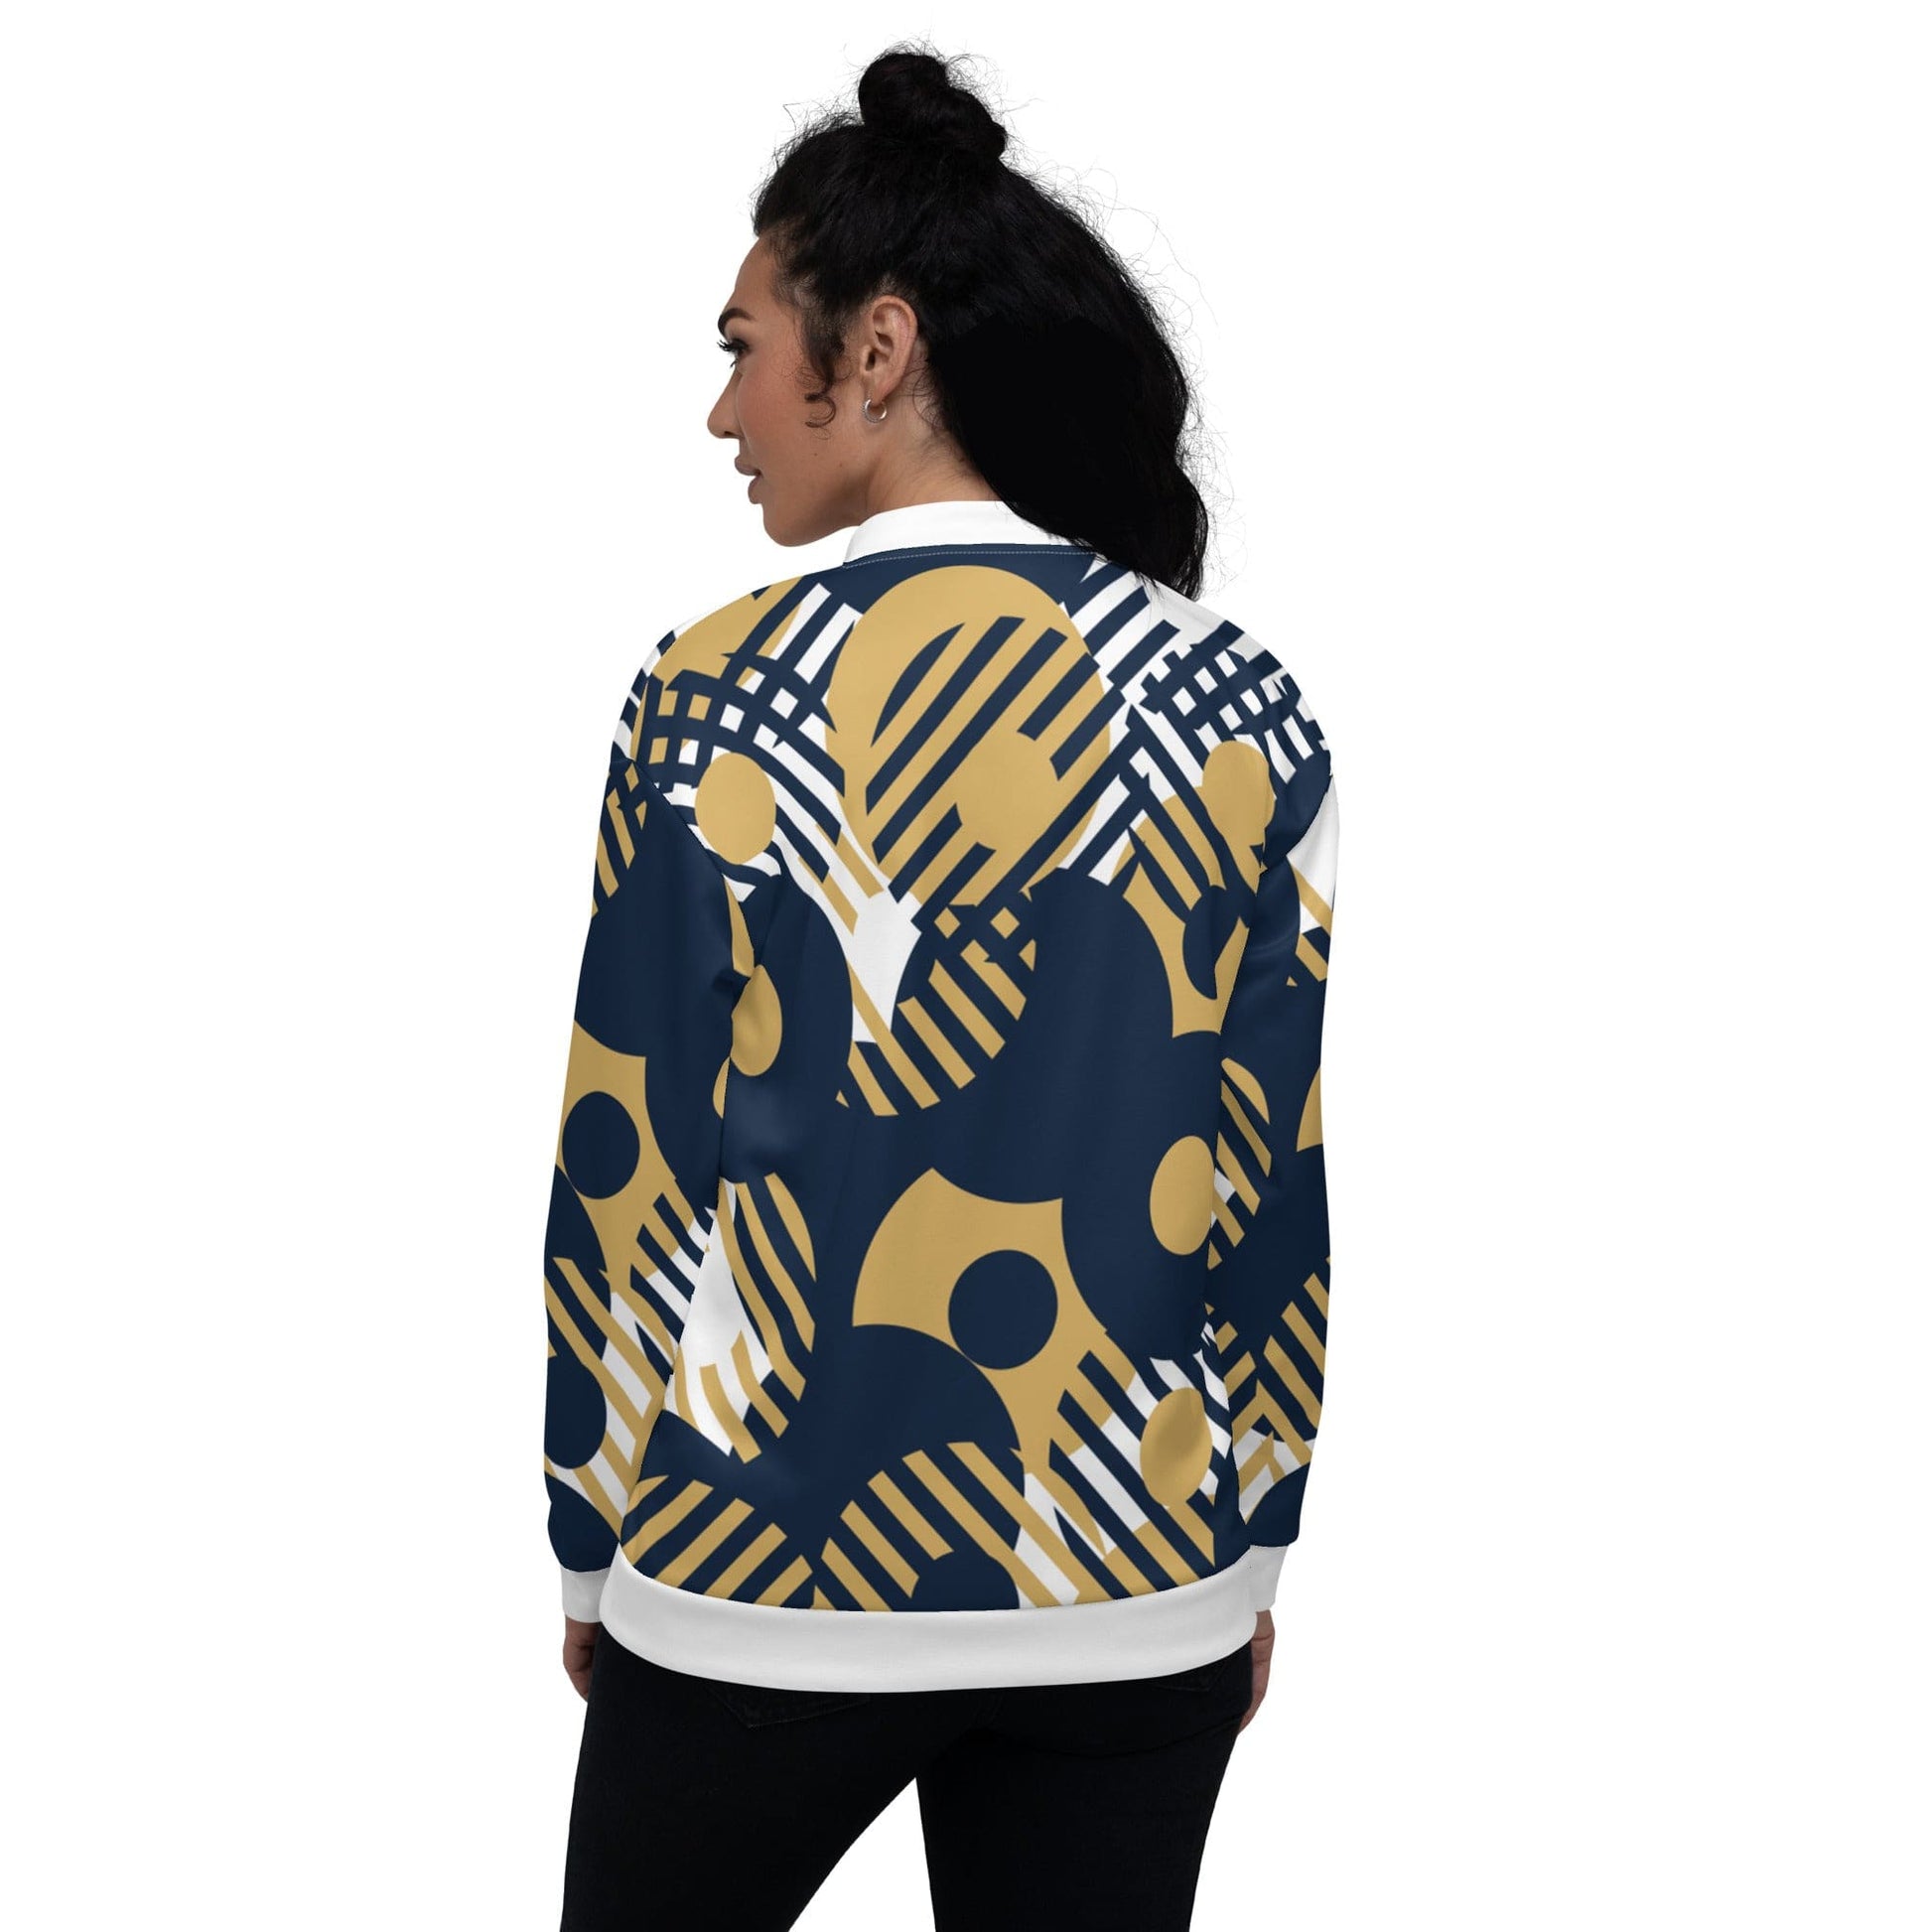 Womens Bomber Jacket, Blue & Gold Geometric Style - Scarvesnthangs